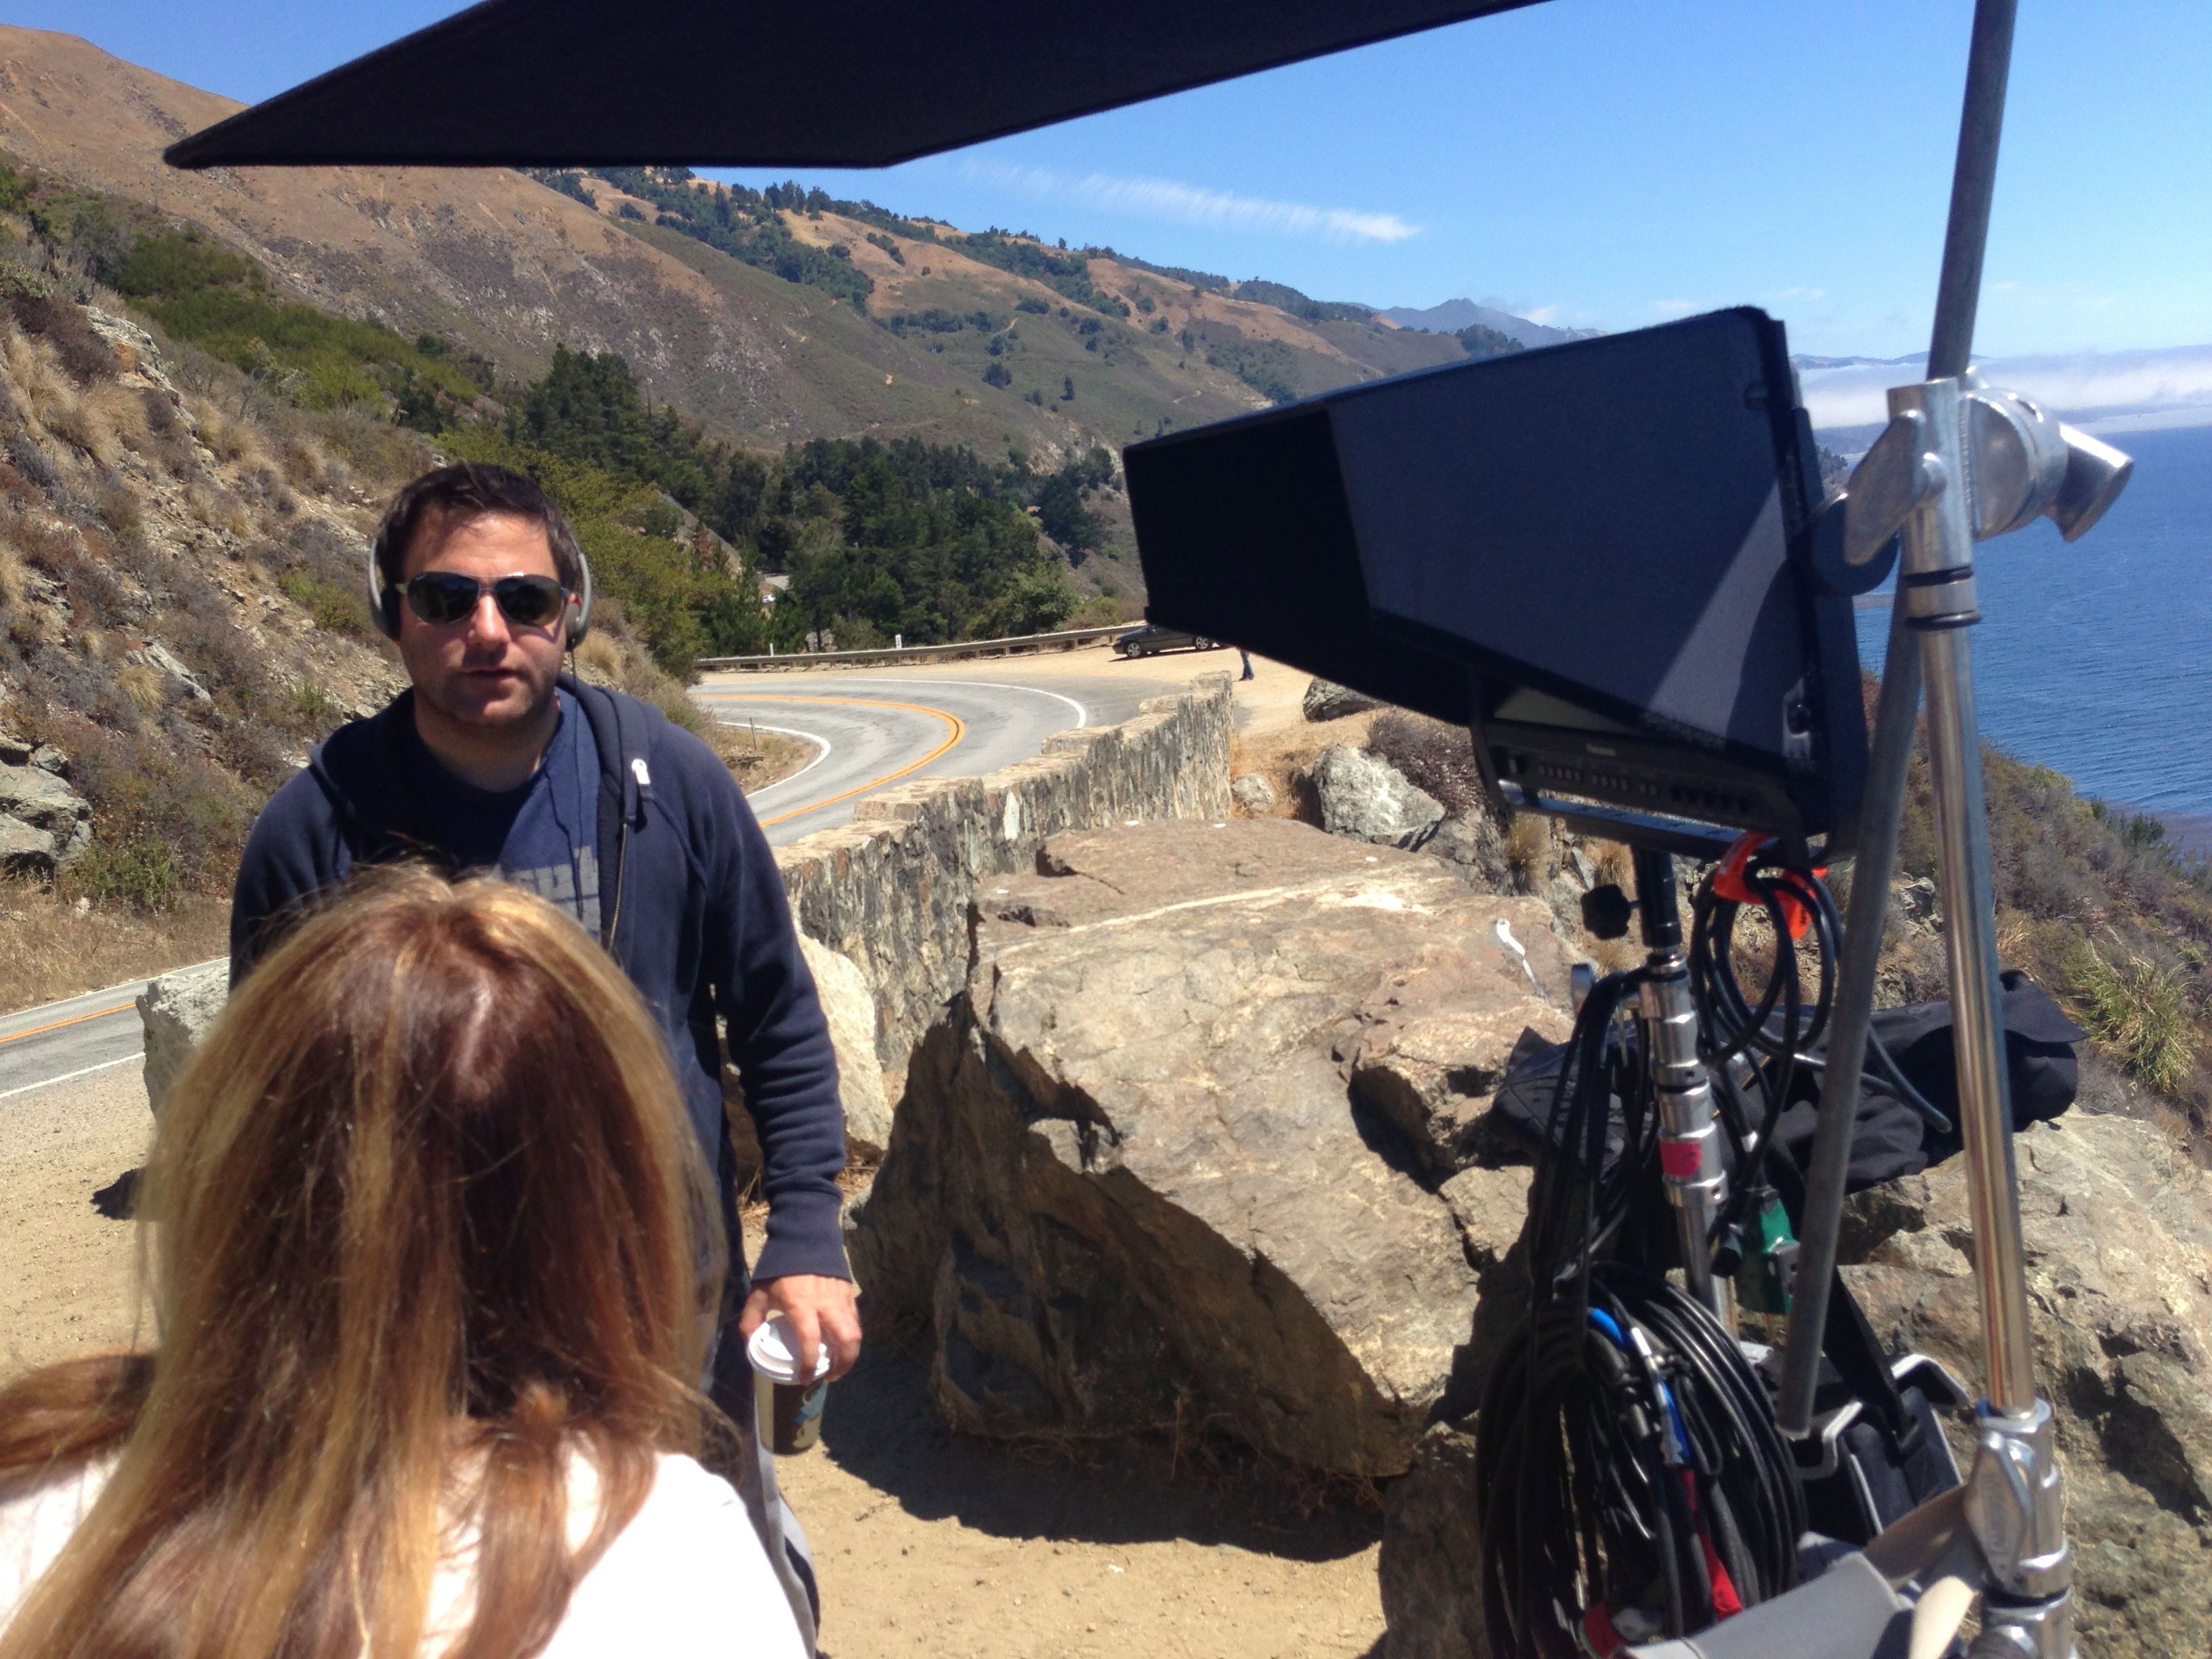 Bradley Gallo on the set of The Road Within in Big Sur